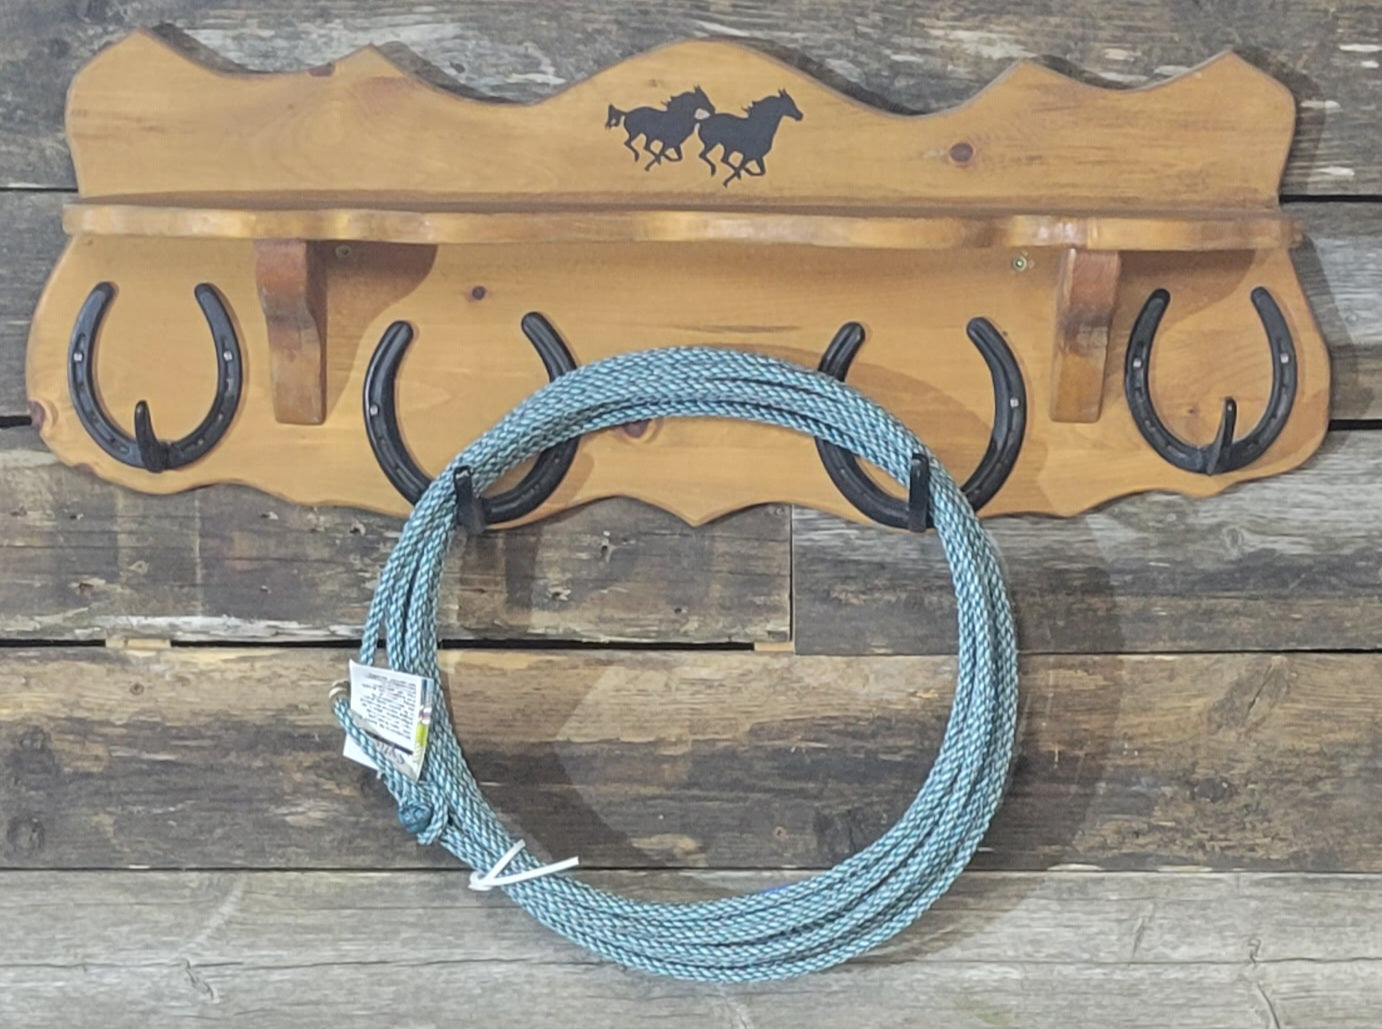 What is a Left Twist Rope? – Cowboy Cordage